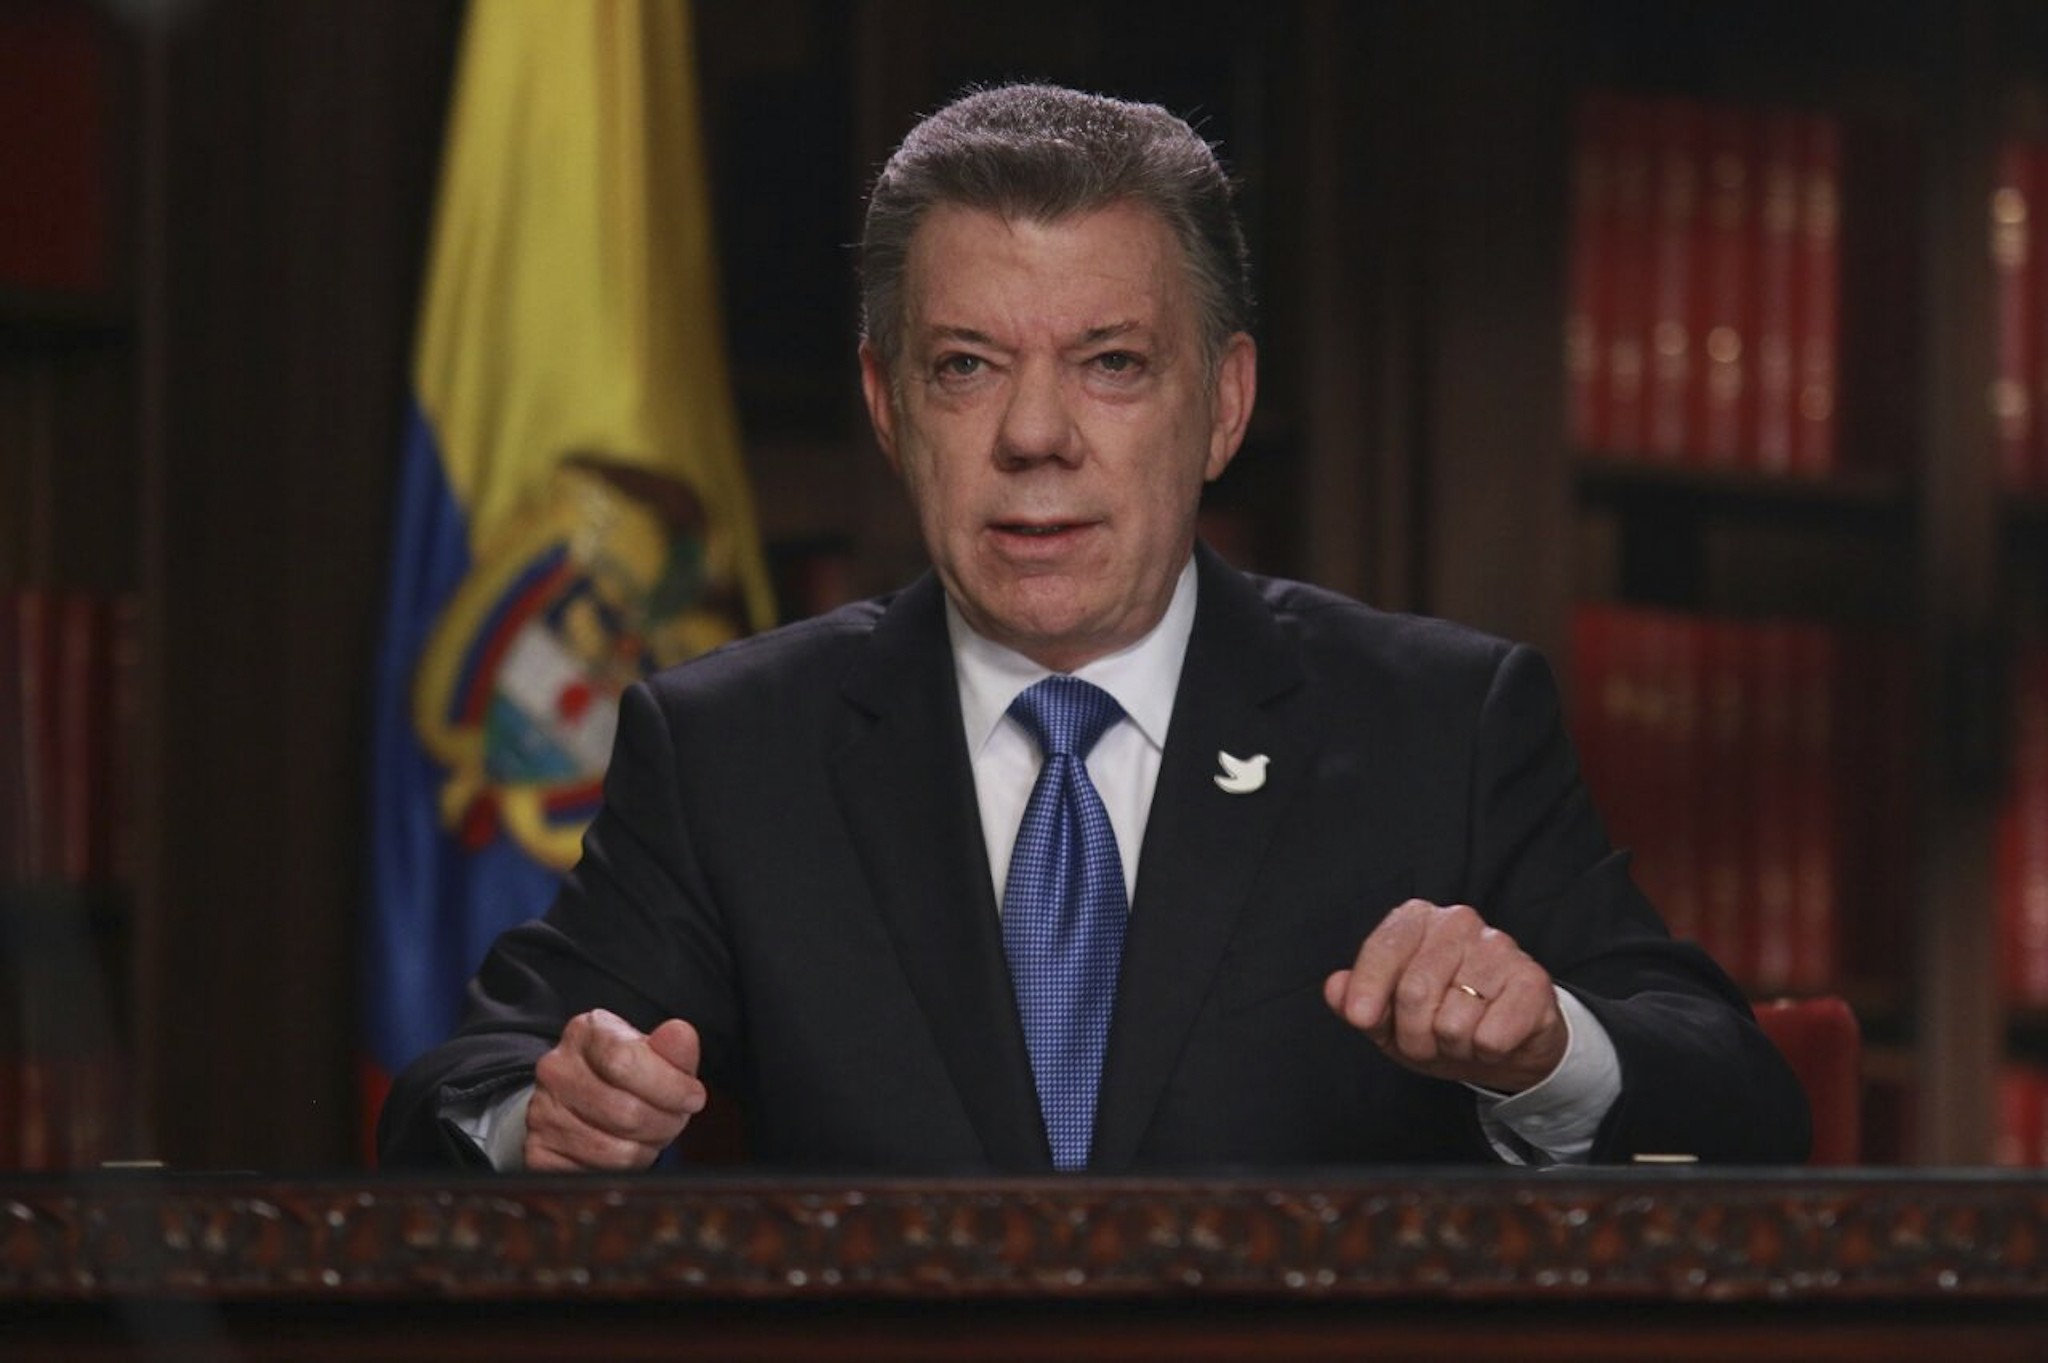  Colombian President Juan Manuel Santos announcing the start of the of peace negotiations with the countryu2019s second largest guerilla group of the National Liberation Army (ELN), Oct. 10, 2016, Bogota, Colombia. (AFP Photo)